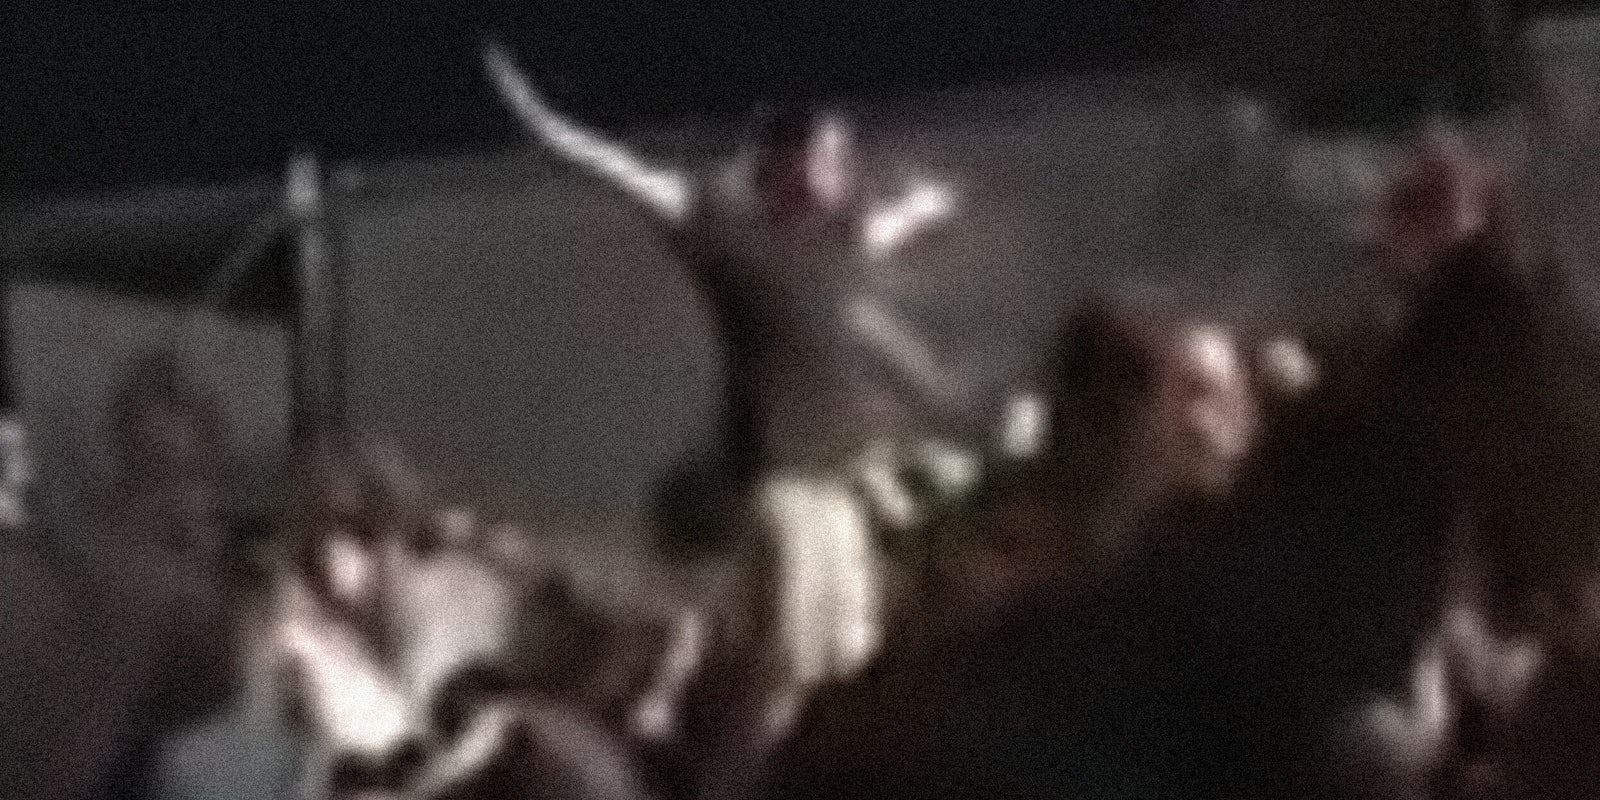 Man standing in crowd taunting the Las Vegas shooter